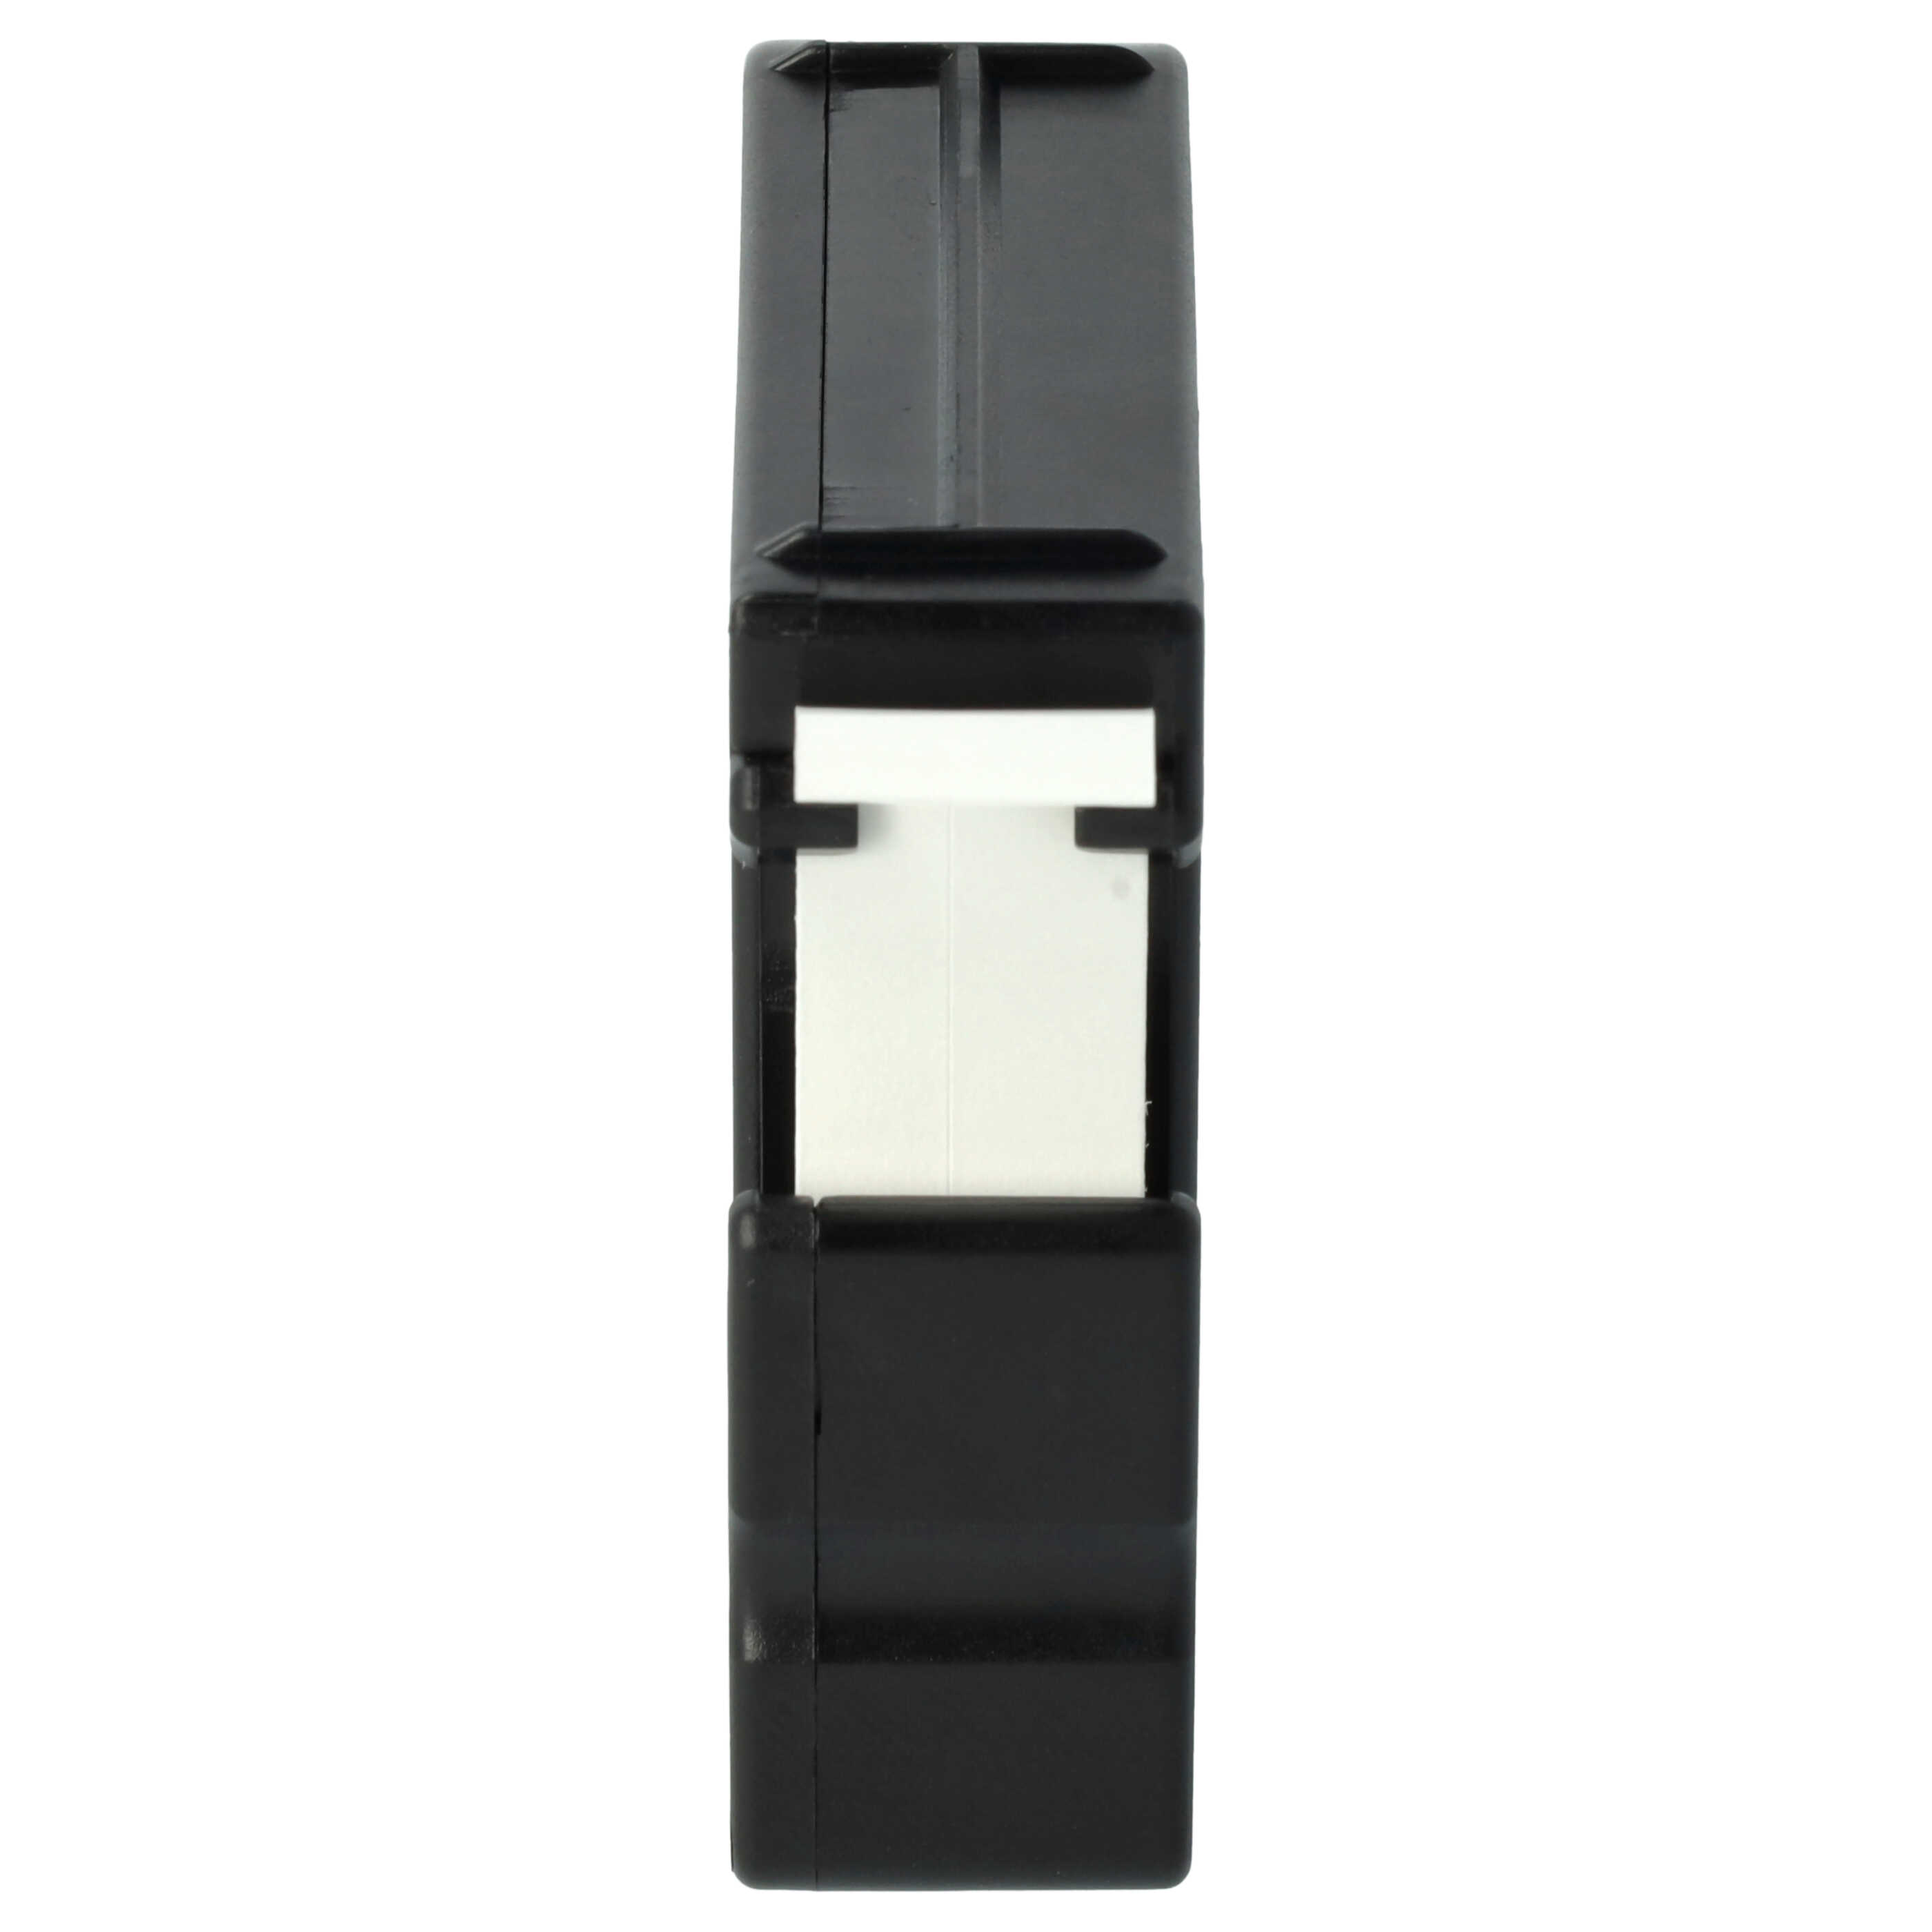 Label Tape as Replacement for Brother M-K231 - 12 mm Black to White